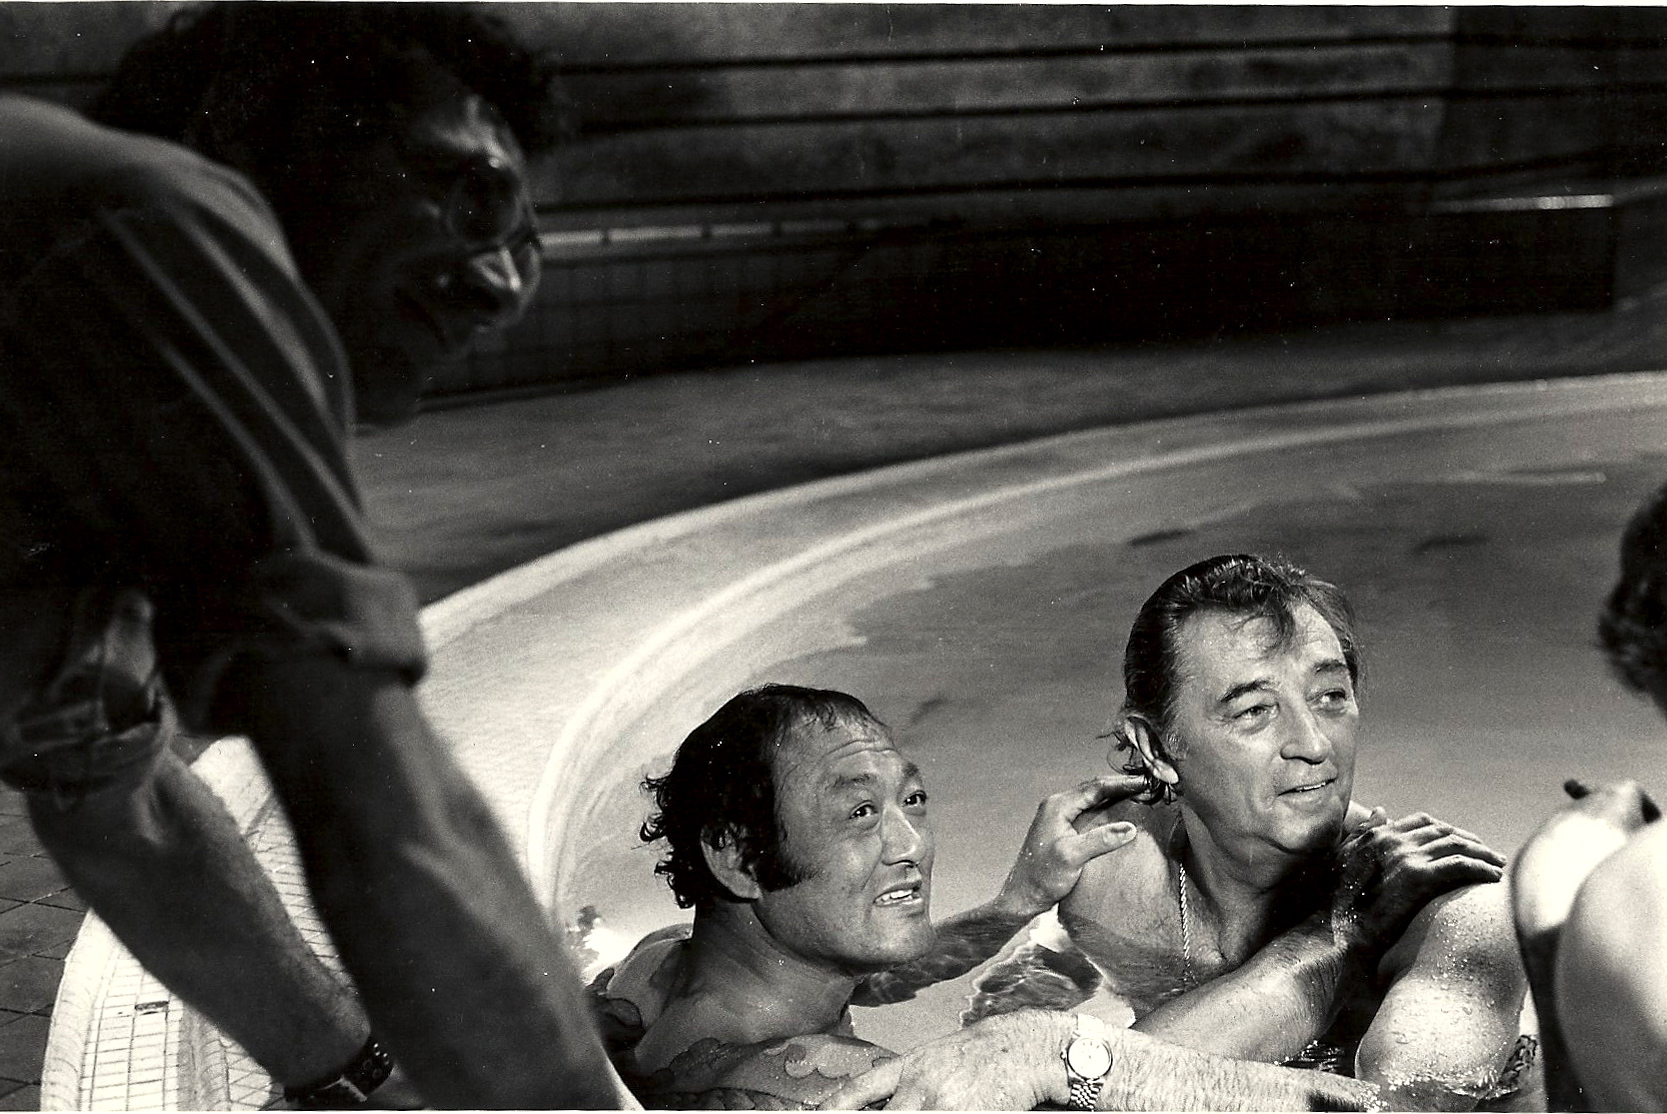 Sydney Pollack in rehearsal of The Yakuza, with Robert Mitchum